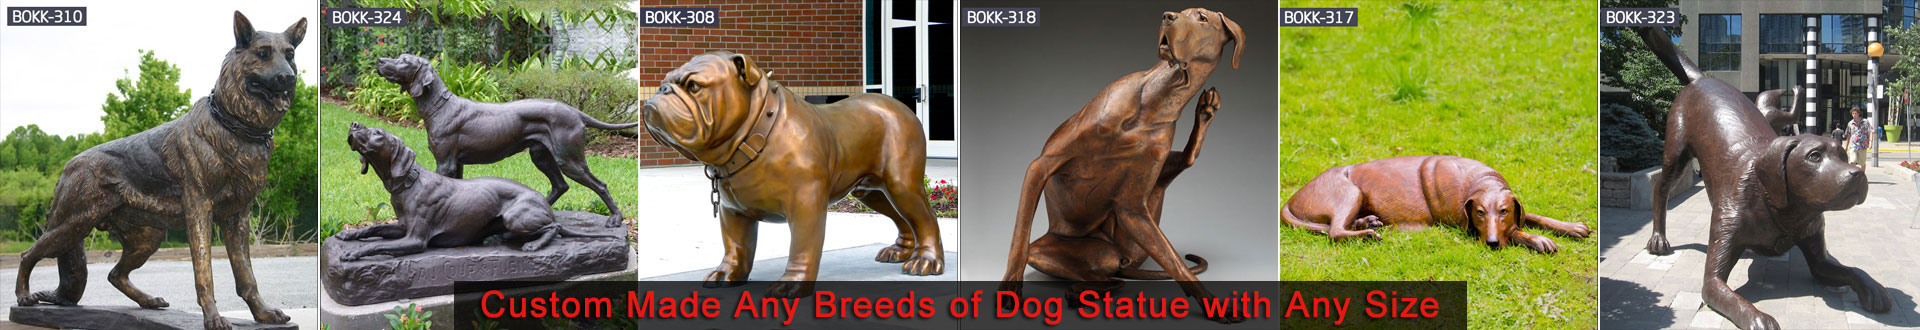 life size dog statues for sale